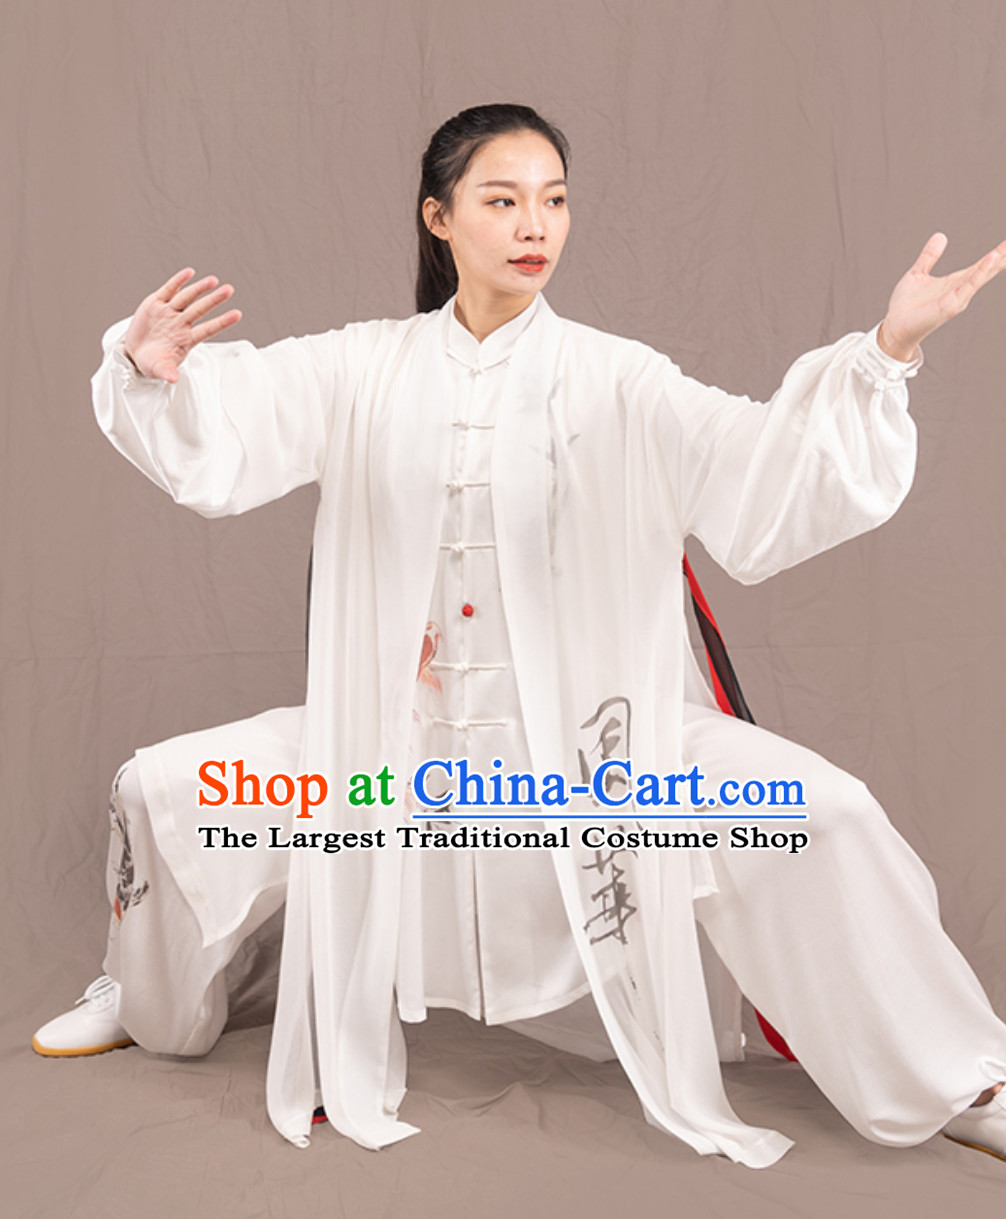 Top Chinese Traditional Competition Championship Professional Tai Chi Uniforms Taiji Kung Fu Wing Chun Kungfu Tai Ji Sword Master Clothing Suits Clothes 3 Pieces for Women